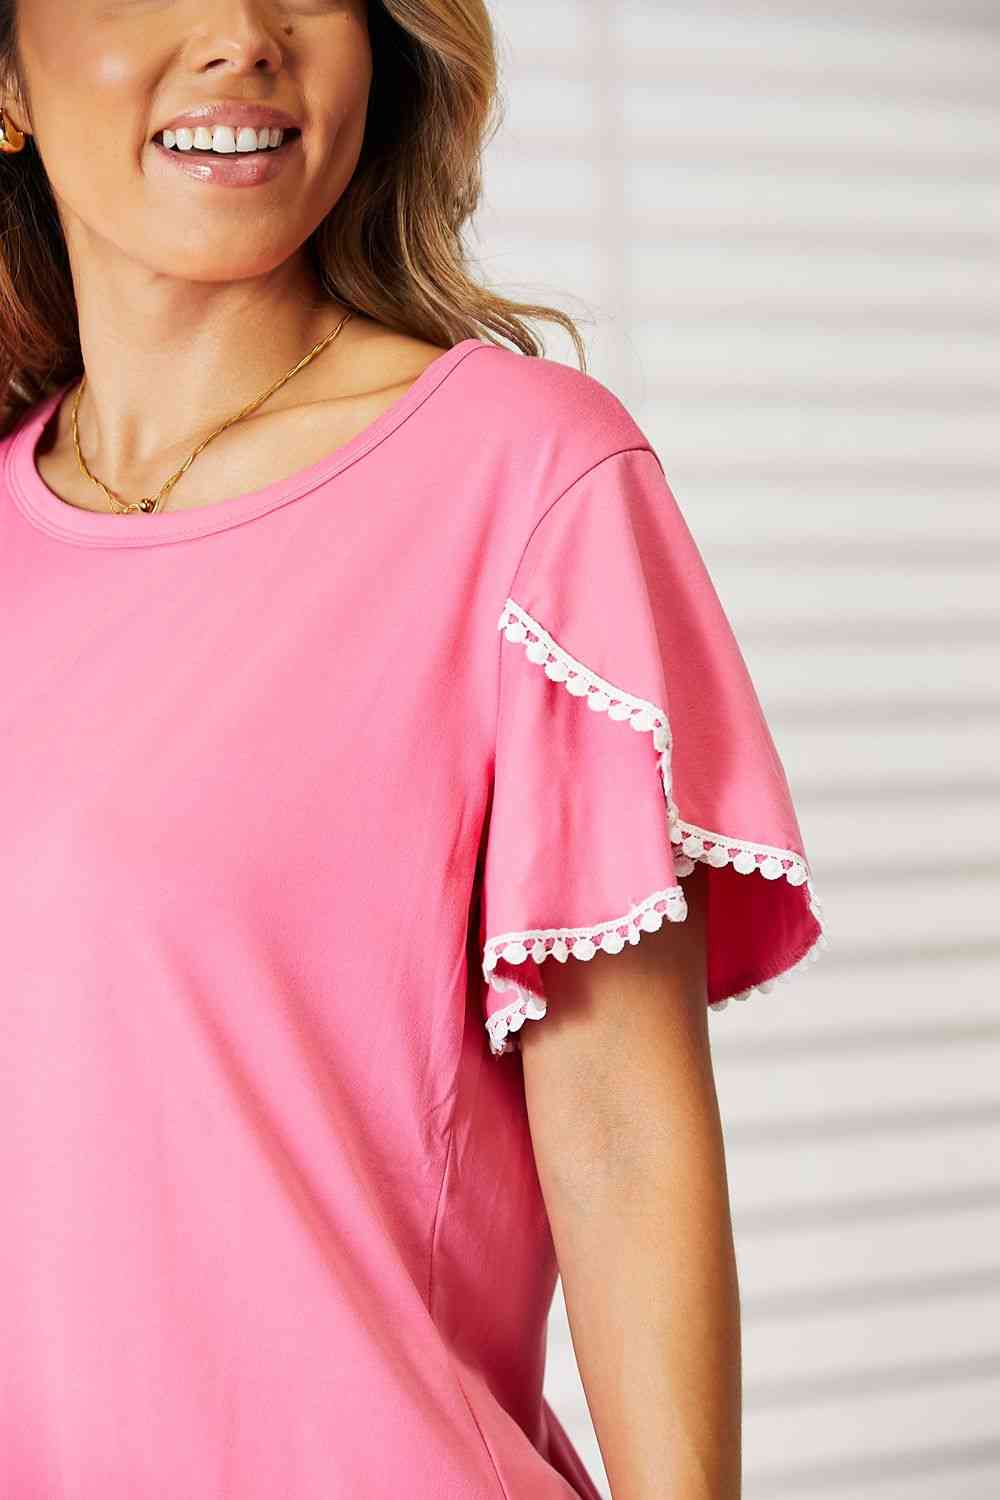 Pom-Pom Trim Flutter Sleeve Round Neck T-Shirt - Kawaii Stop - Double Take, Easy Care, Flutter Sleeve Tee, Machine Wash, Opaque Fabric, Playful Design, Ship from USA, Size Chart, Stylish Women's Clothing, Tumble Dry, Women's Fashion